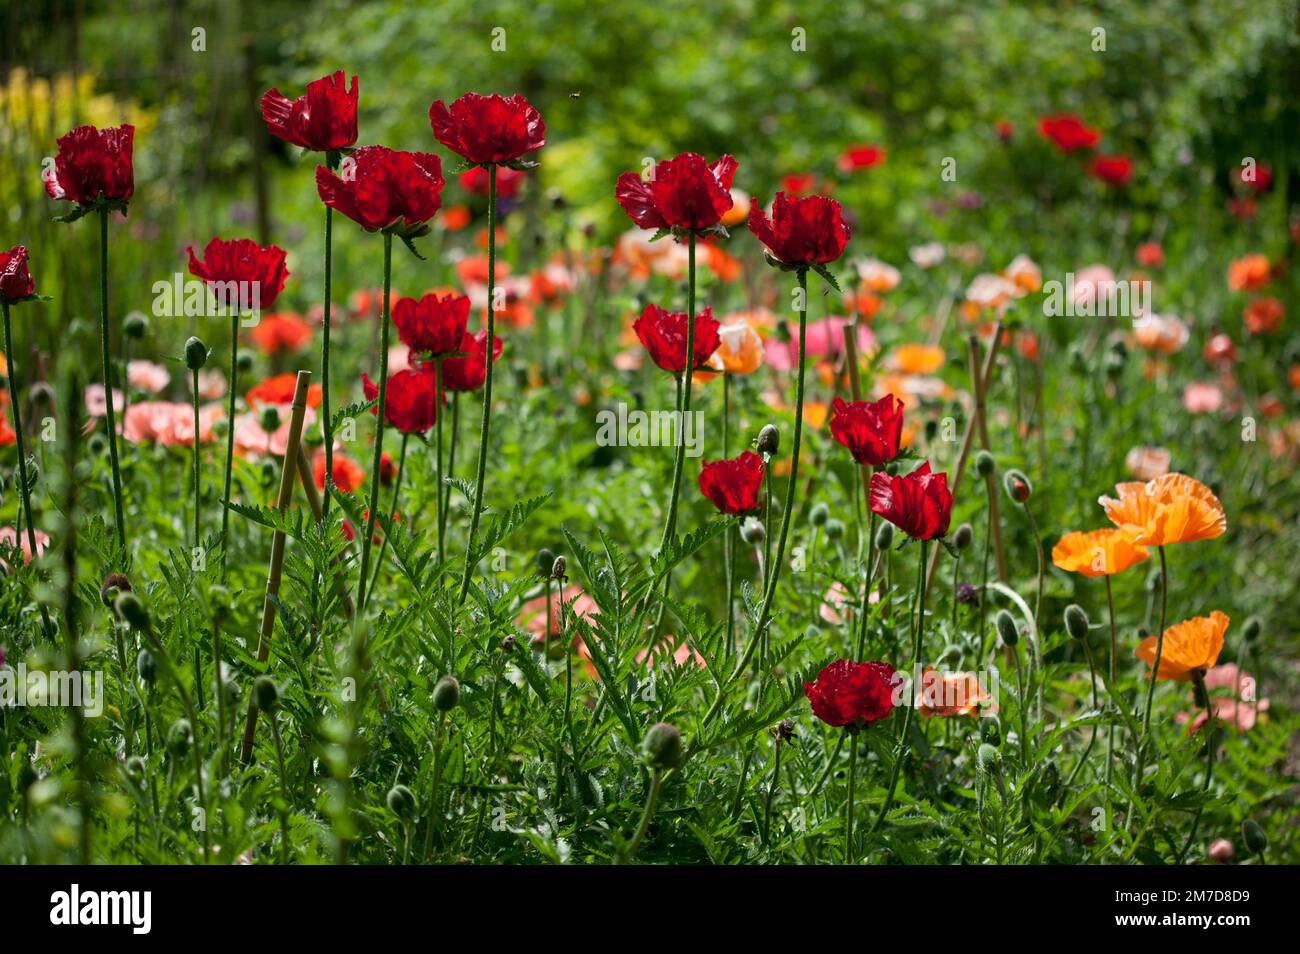 A clump of poppies, probably Papaver Orientale John lll and Papaver Orientale Beauty of Livermere. Stock Photo